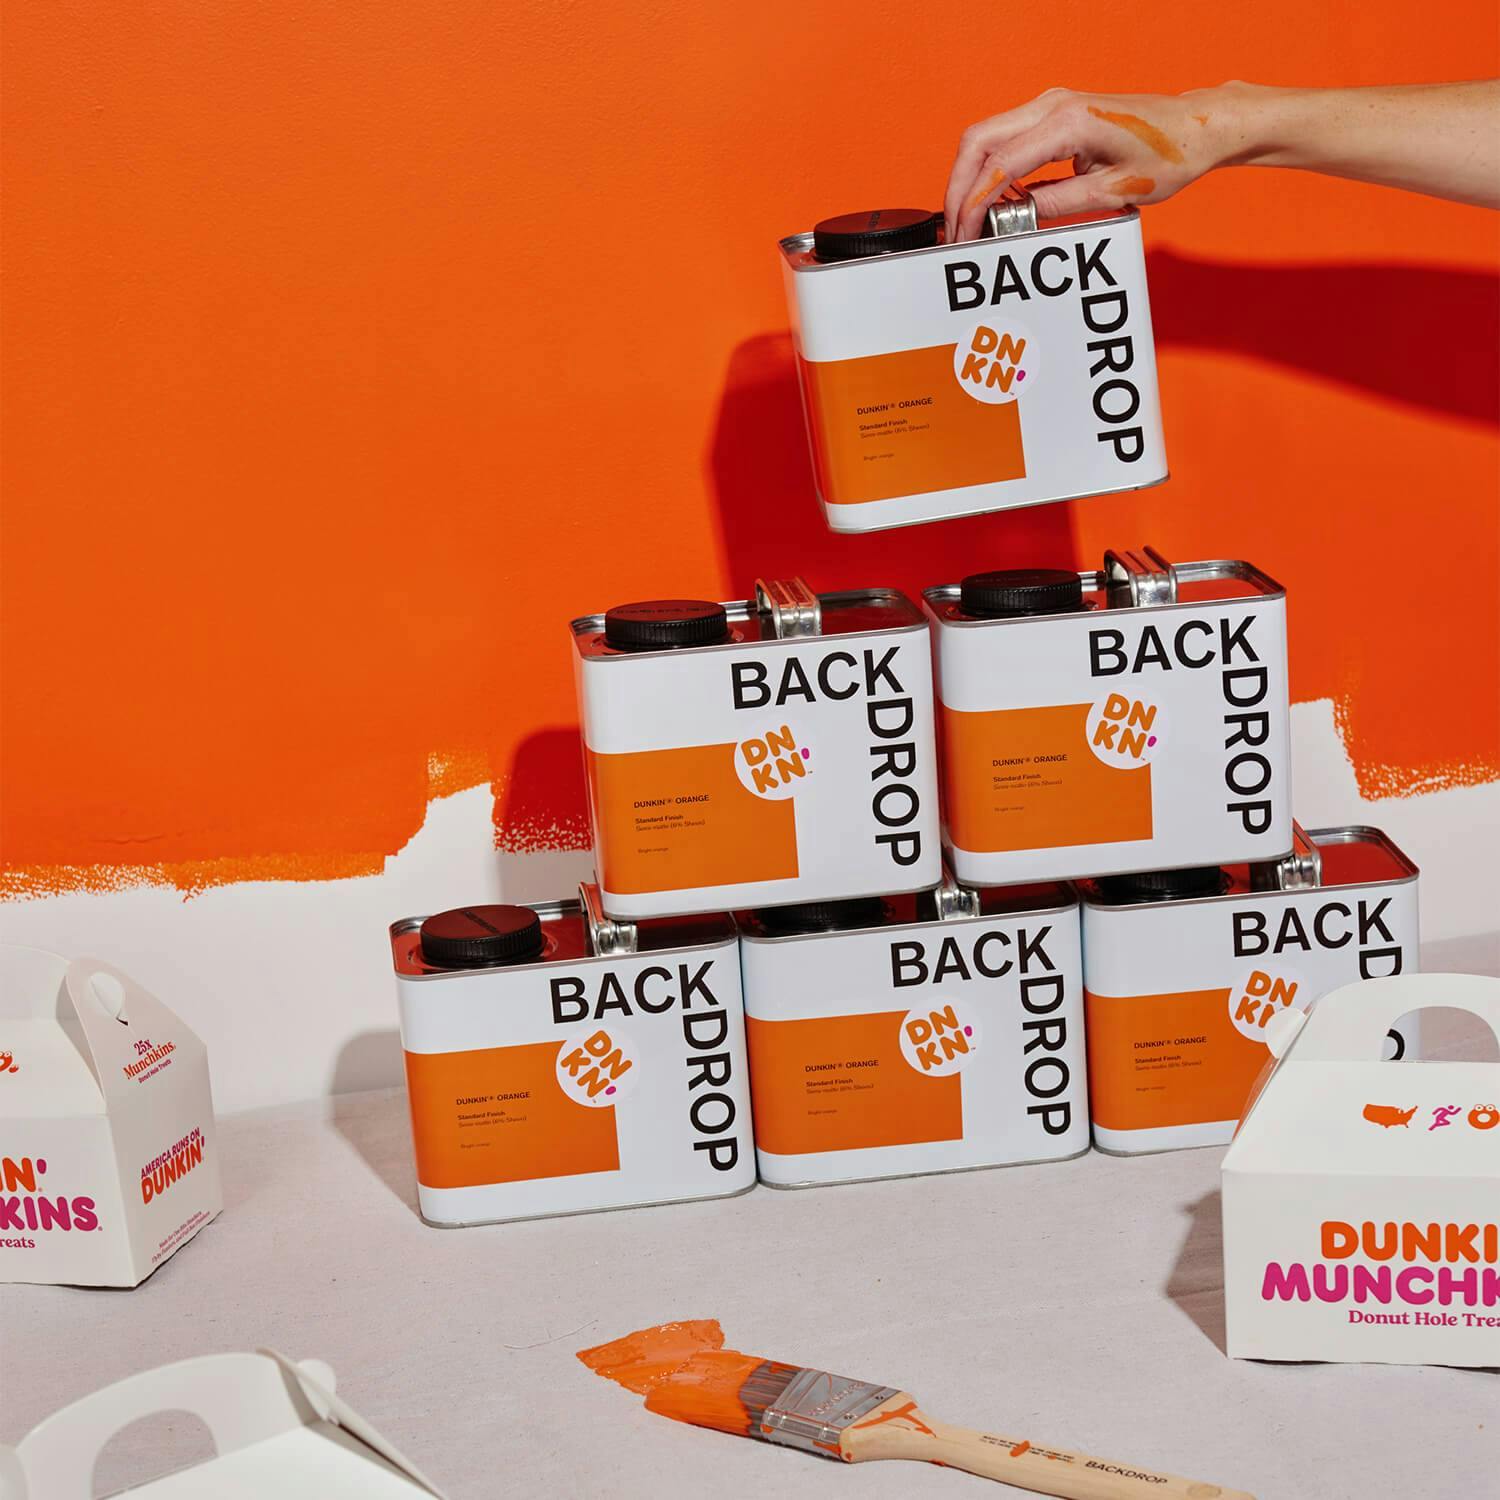 A stack of Dunkin® Orange paint cans